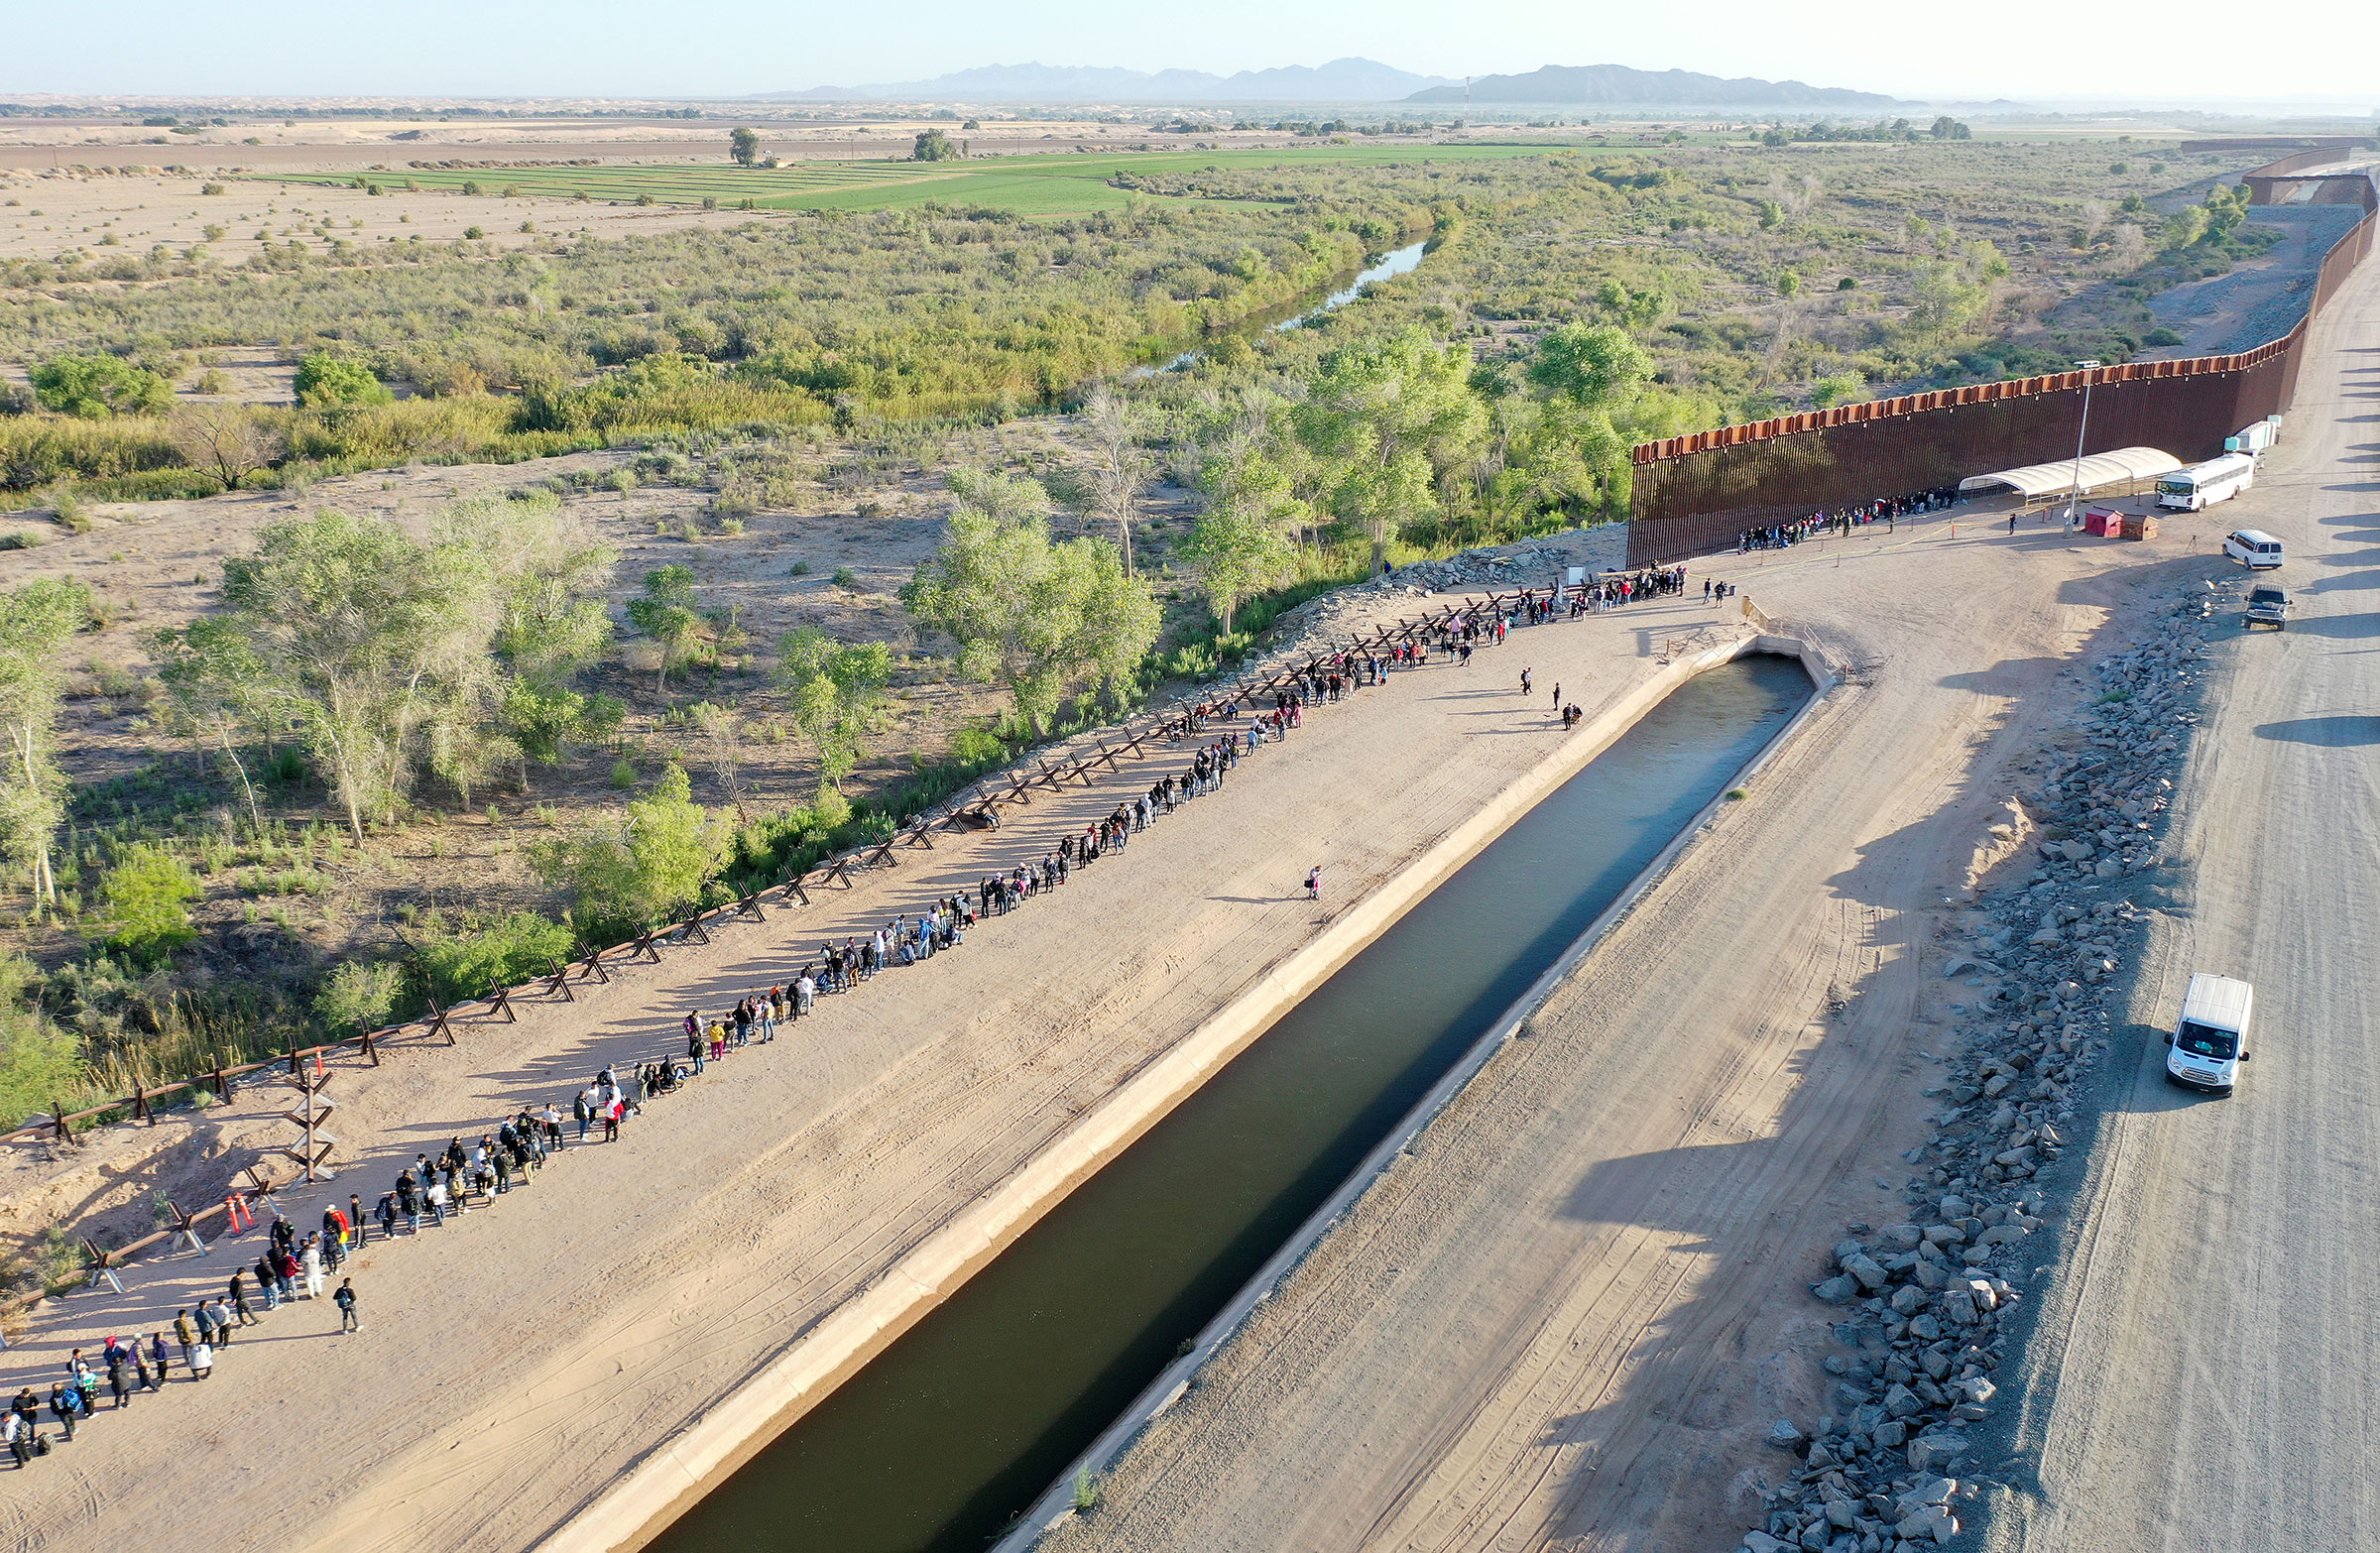 In an aerial view, immigrants seeking asylum in the United States wait in line near the border fence to be processed by U.S. Border Patrol agents after crossing into Arizona from Mexico in Yuma, Arizona, on May 11, 2023. (Mario Tama—Getty Images)